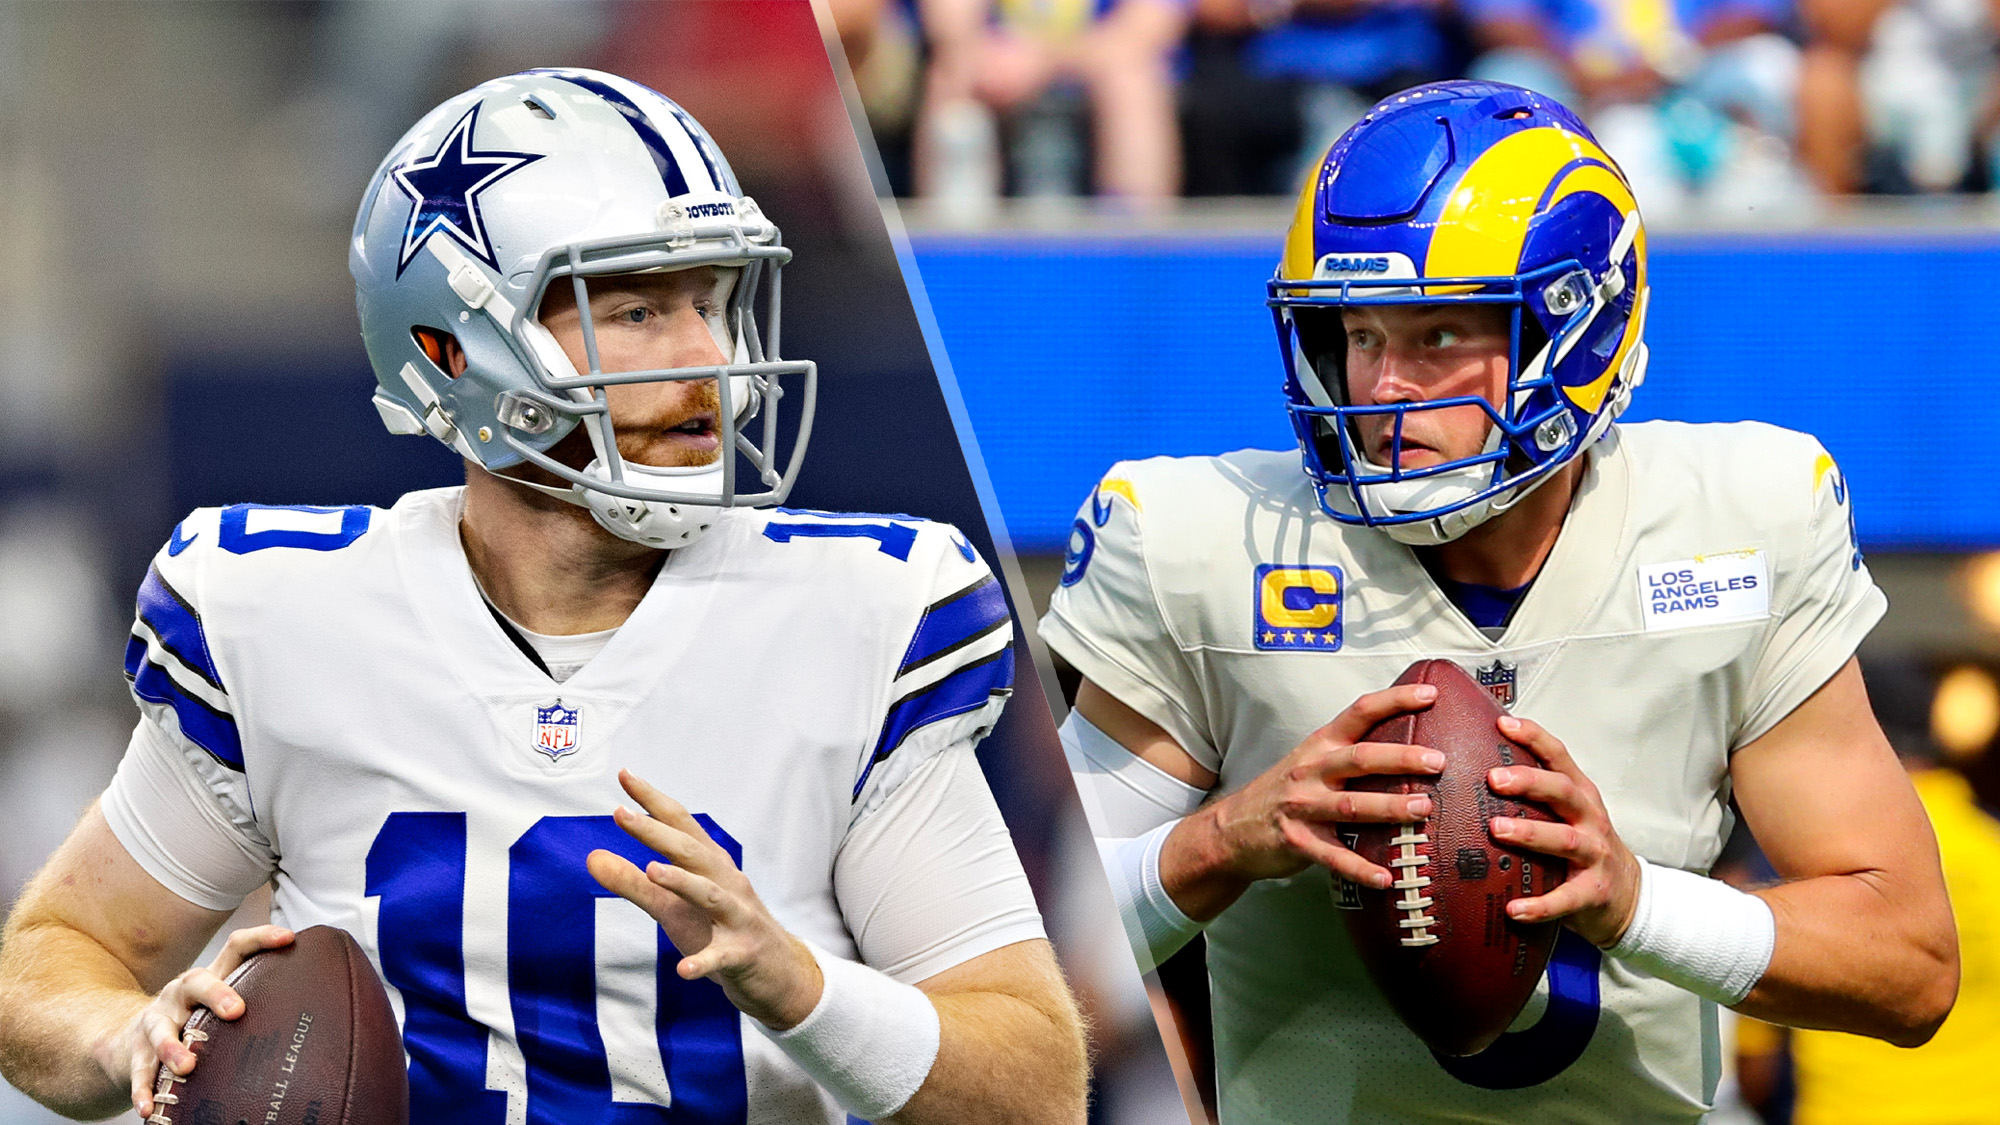 Cowboys vs Rams live stream is today: How to watch NFL week 5 online